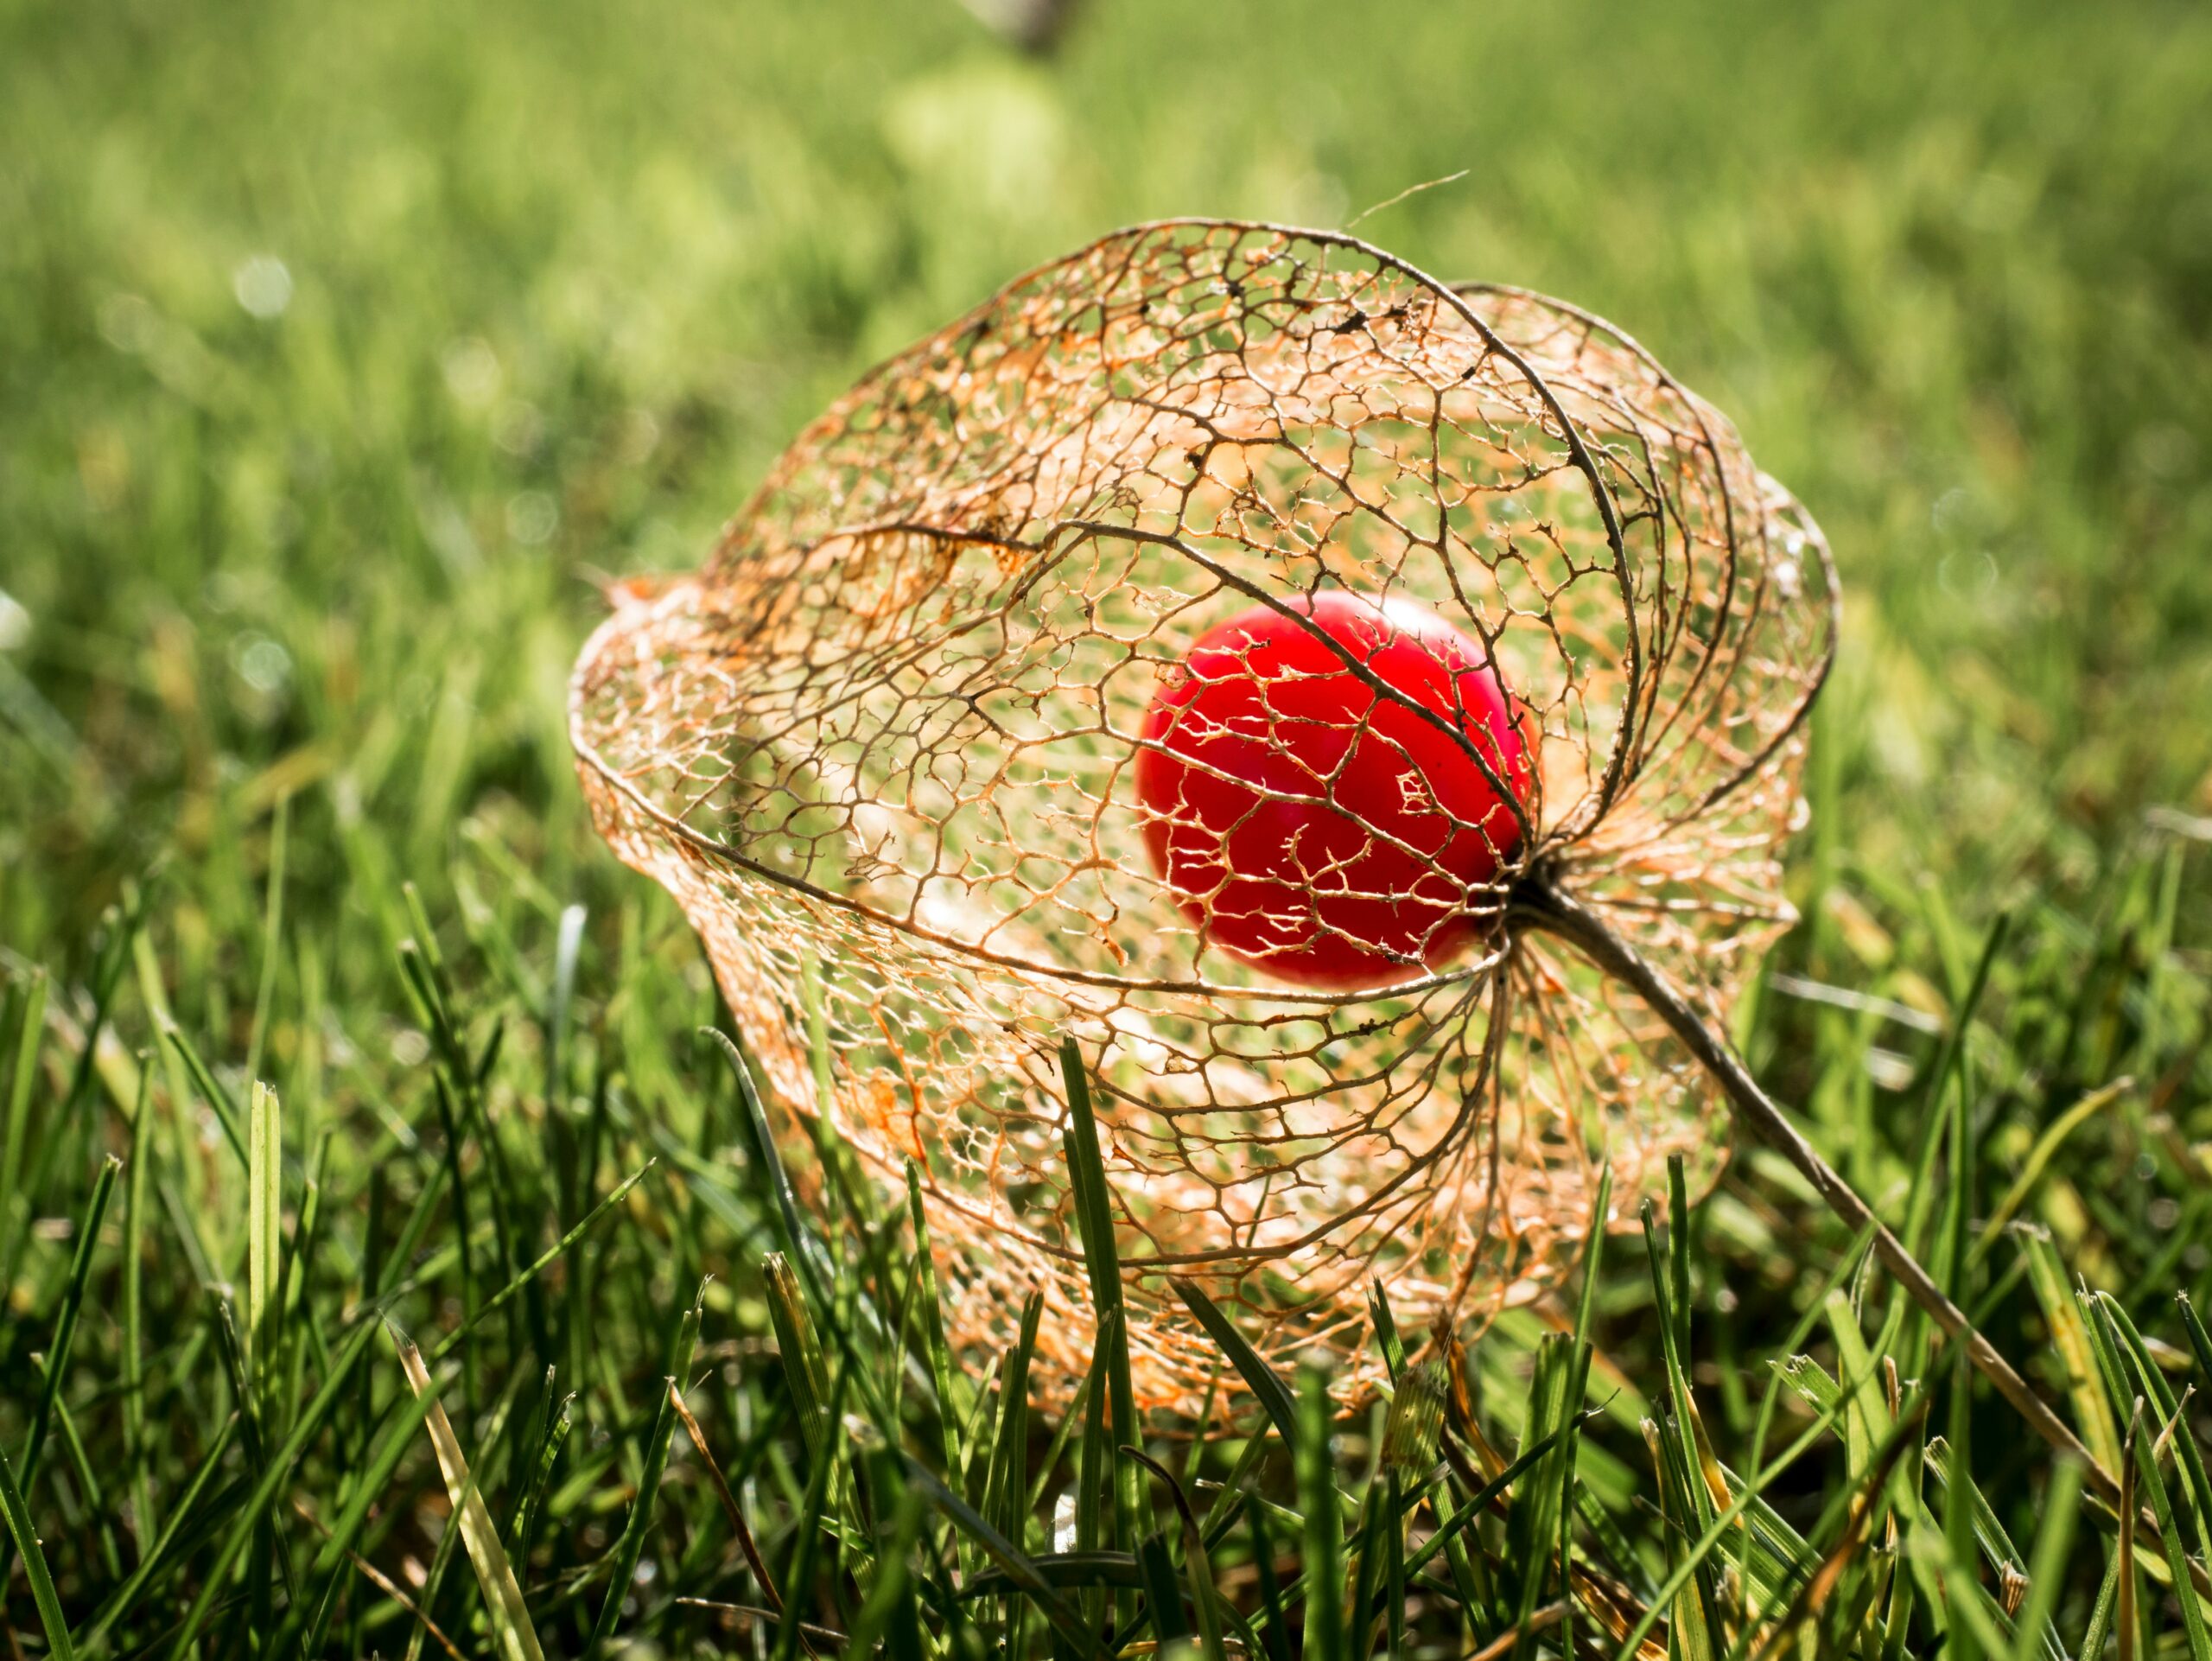 A fragile dried out petal protects a red berry, as it lays on green grass